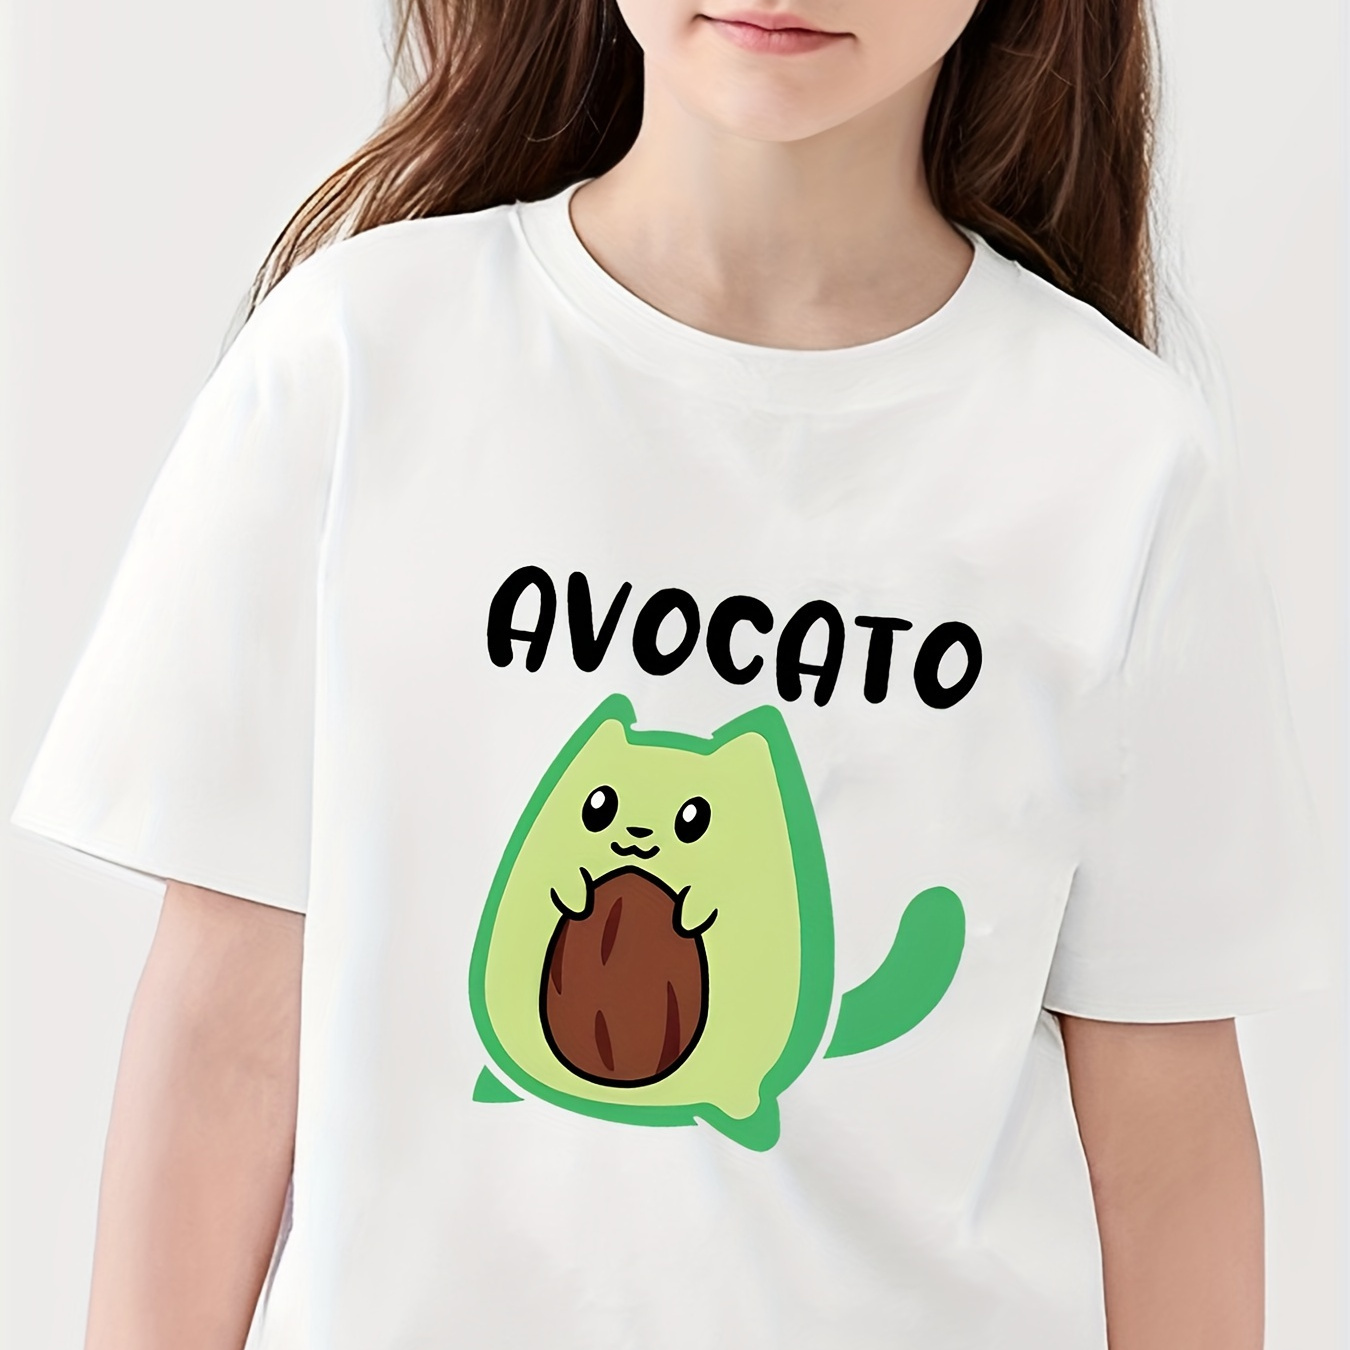 

Avocato And Cute Anime Animal With Core In Avocado Color Graphic Print For Girls, Comfy And Fit T-shirt Top Pullover For Spring And Summer For Outdoor Activities